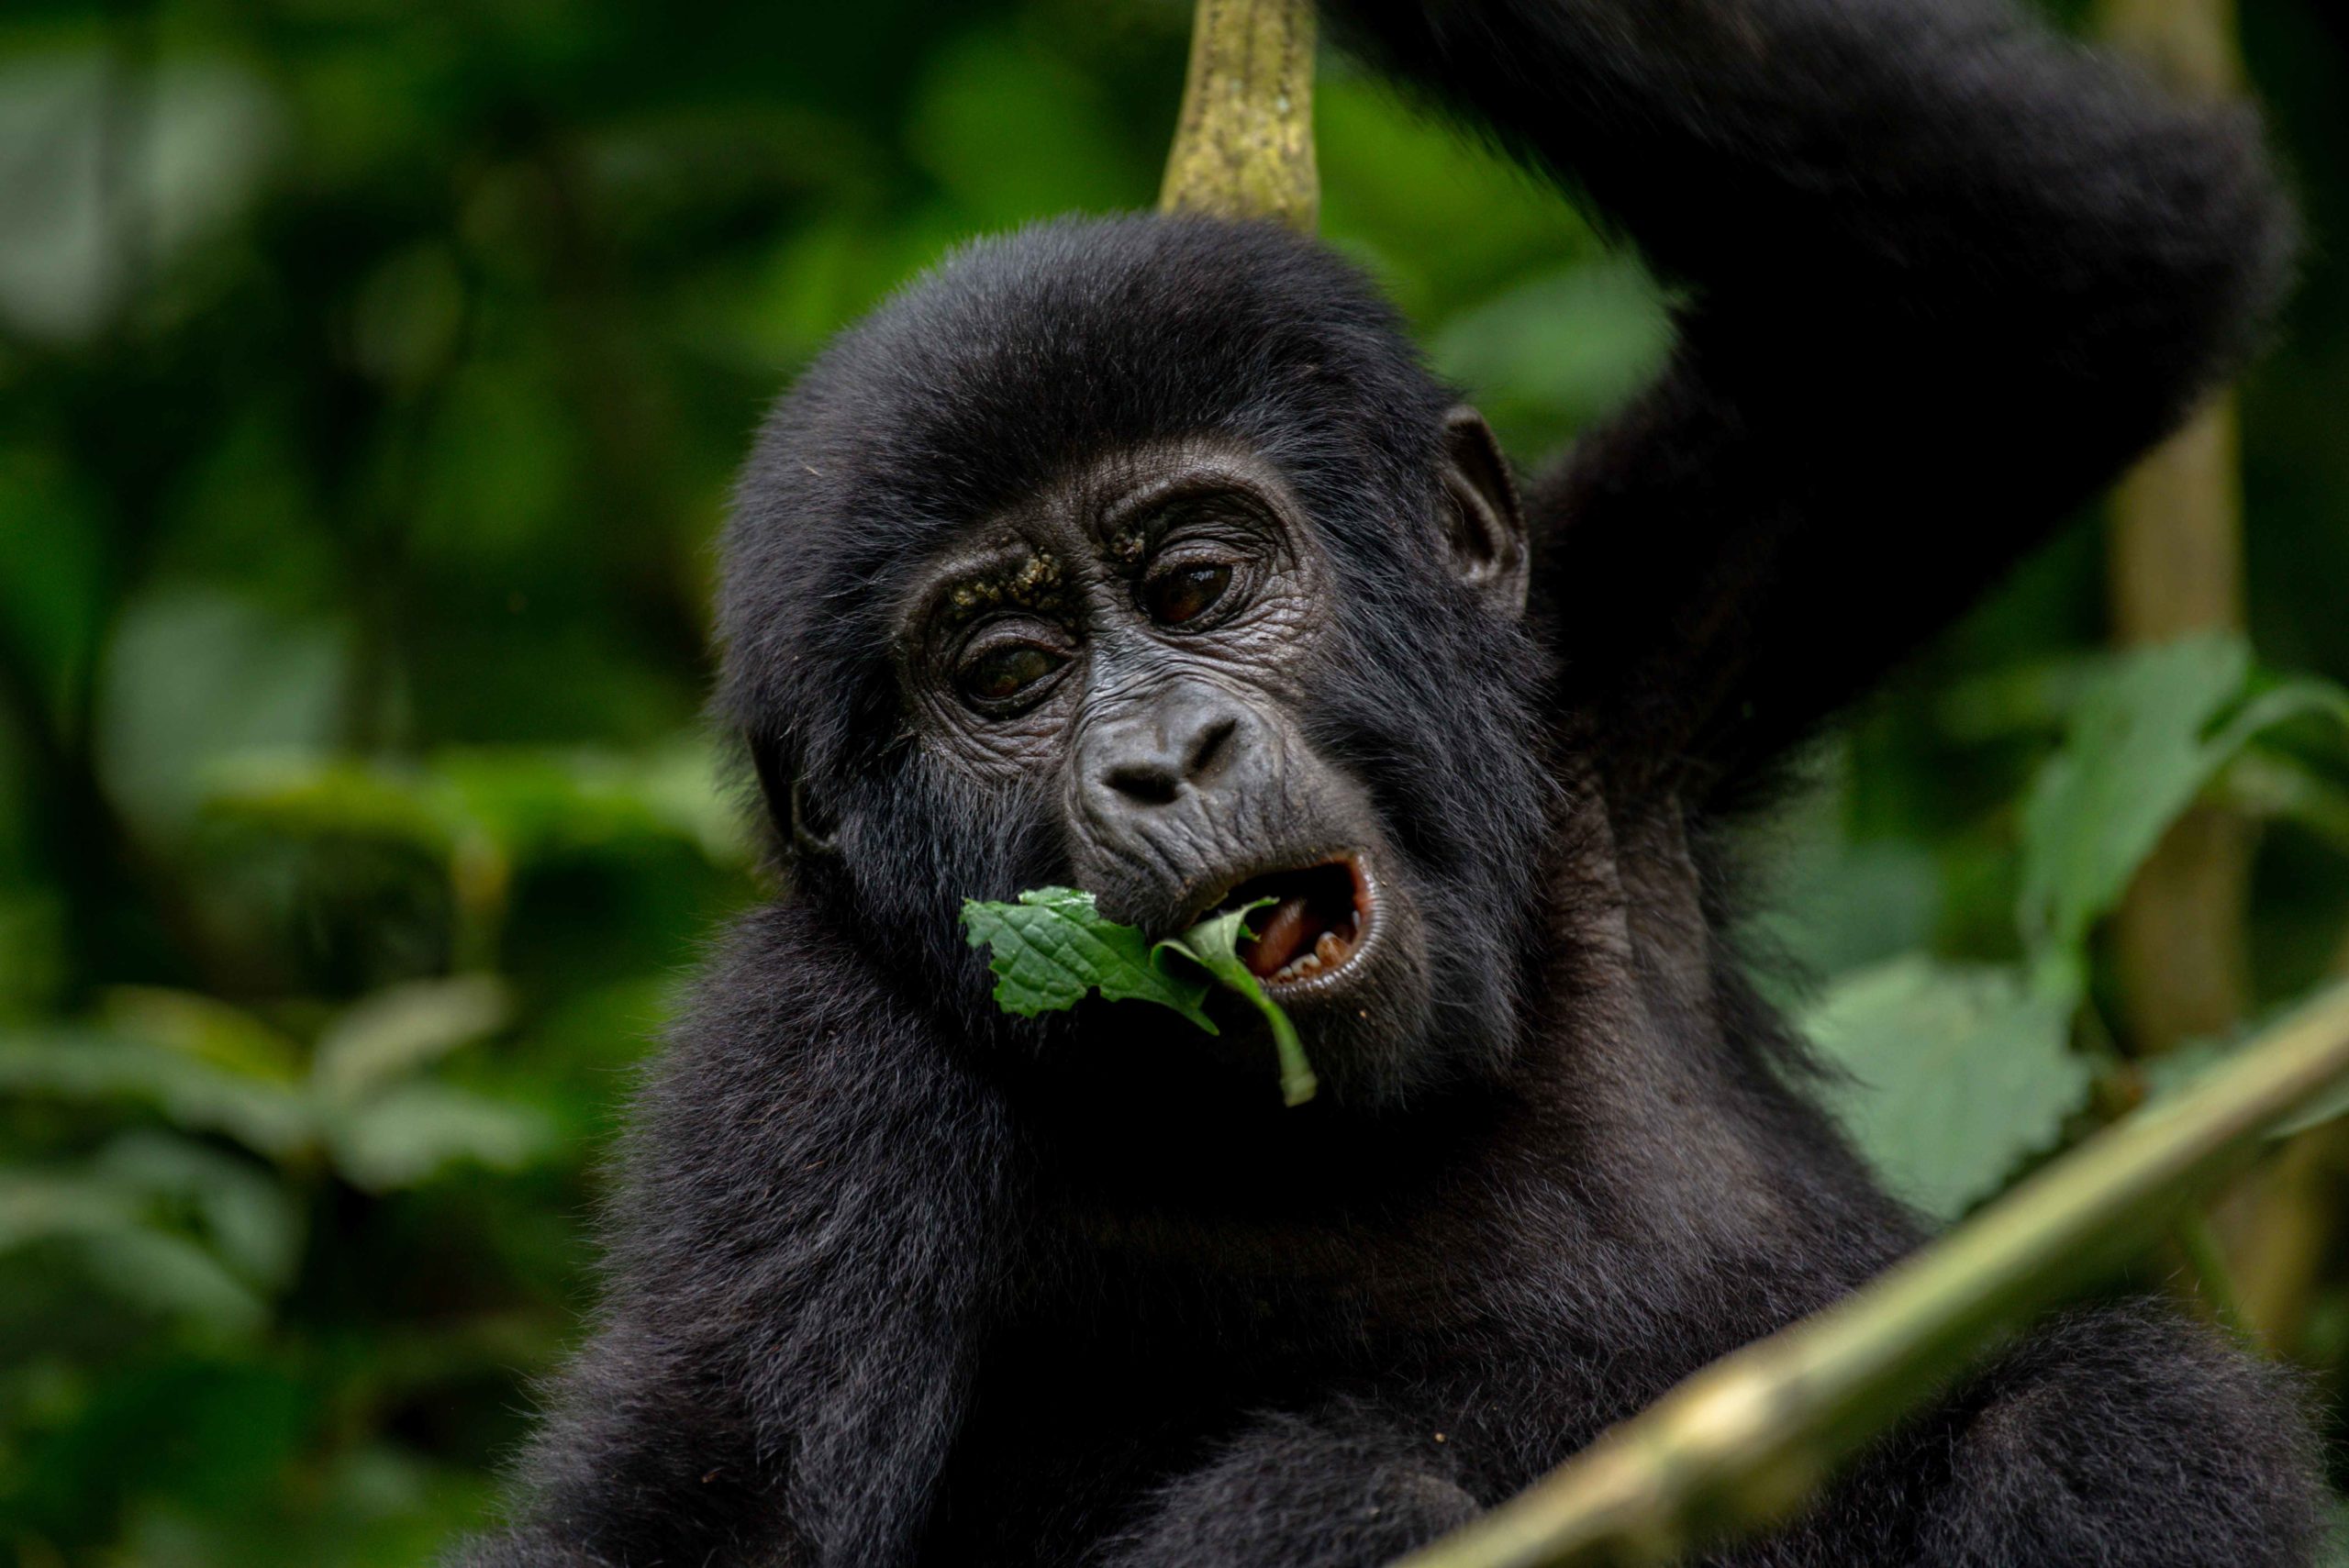 How many days need for Gorilla Trekking Tour ?